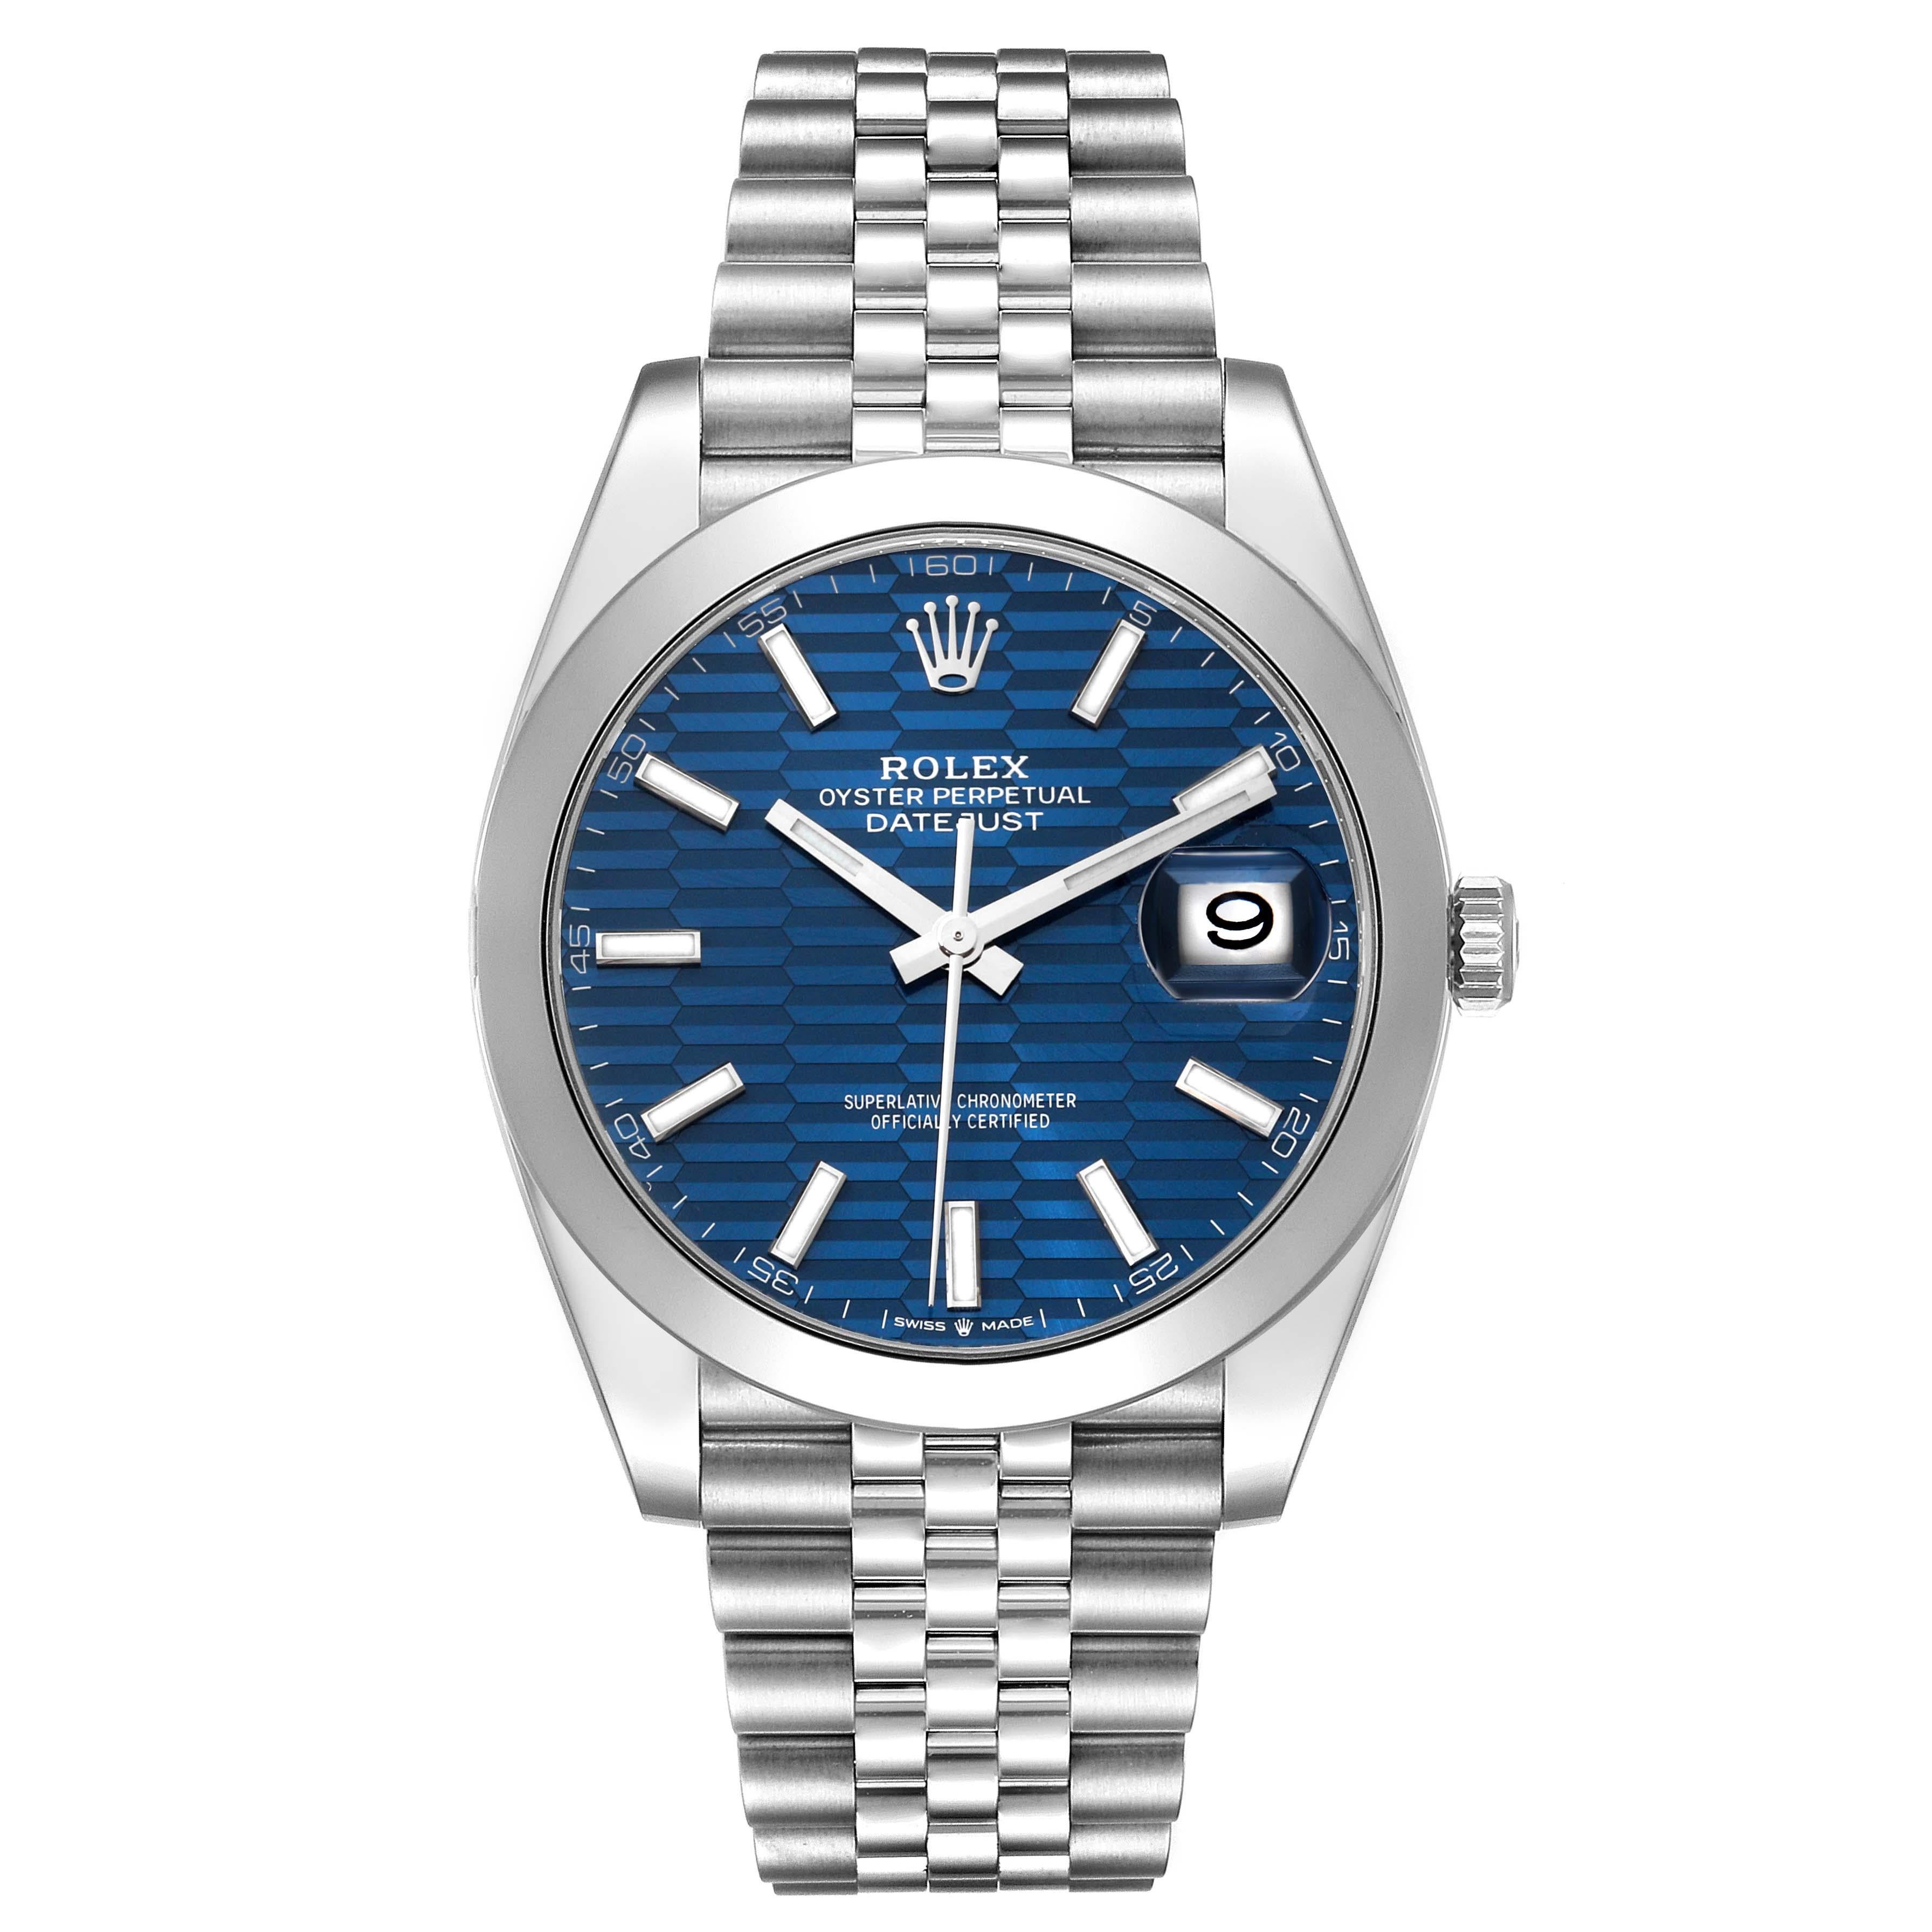 Rolex Datejust 41 Blue Fluted Dial Steel Mens Watch 126300 Box Card. Officially certified chronometer automatic self-winding movement. Stainless steel case 41 mm in diameter. Rolex logo on the crown. Stainless steel smooth bezel. Scratch resistant